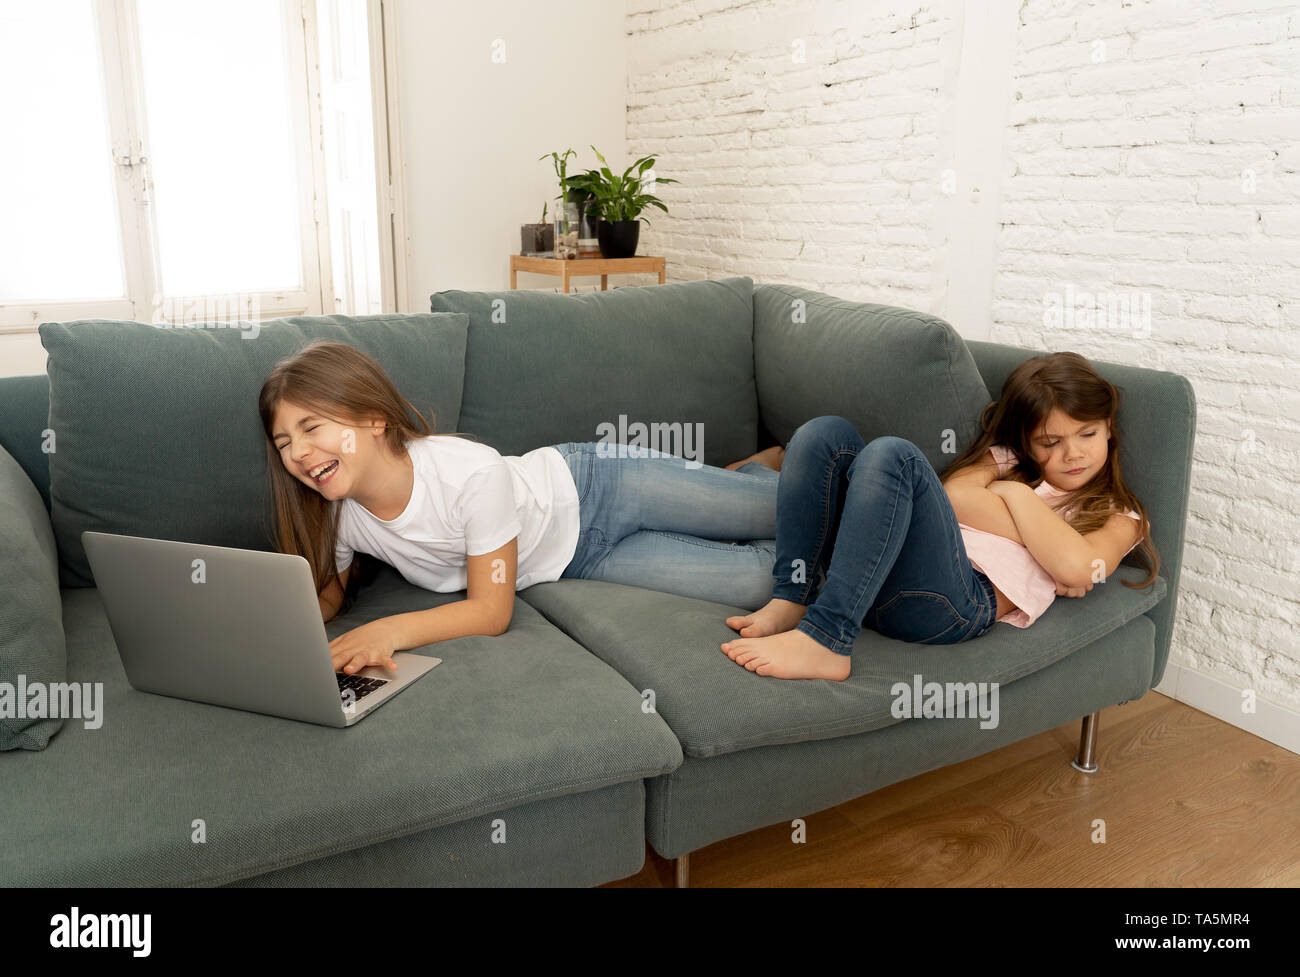 Digital technology addicted young girl playing on the internet using laptop ignoring her sad younger sister. Little girl feeling abandoned and unhappy Stock Photo